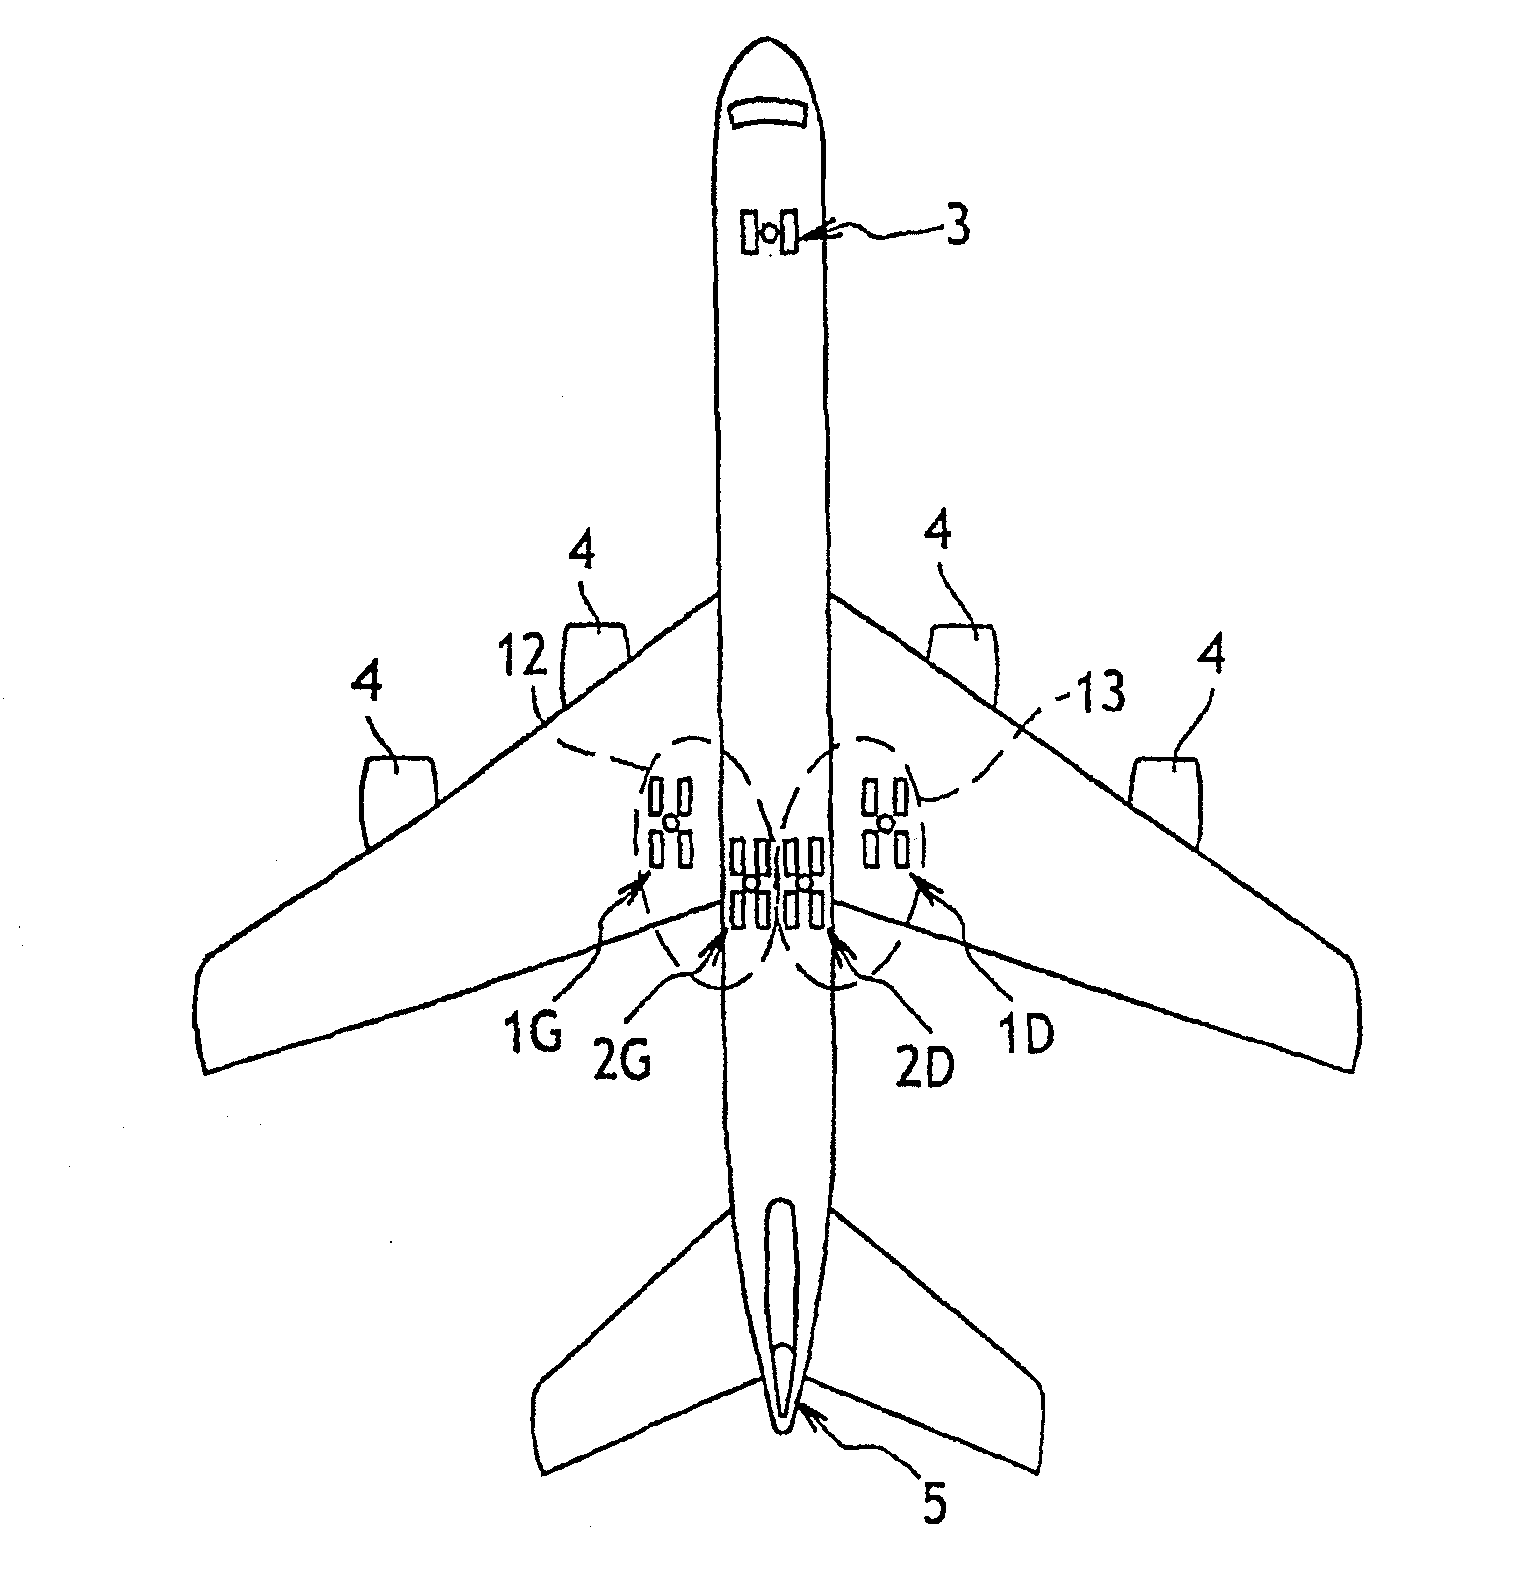 Method of Distributing Braking Within at Least One Group of Brakes of an Aircraft